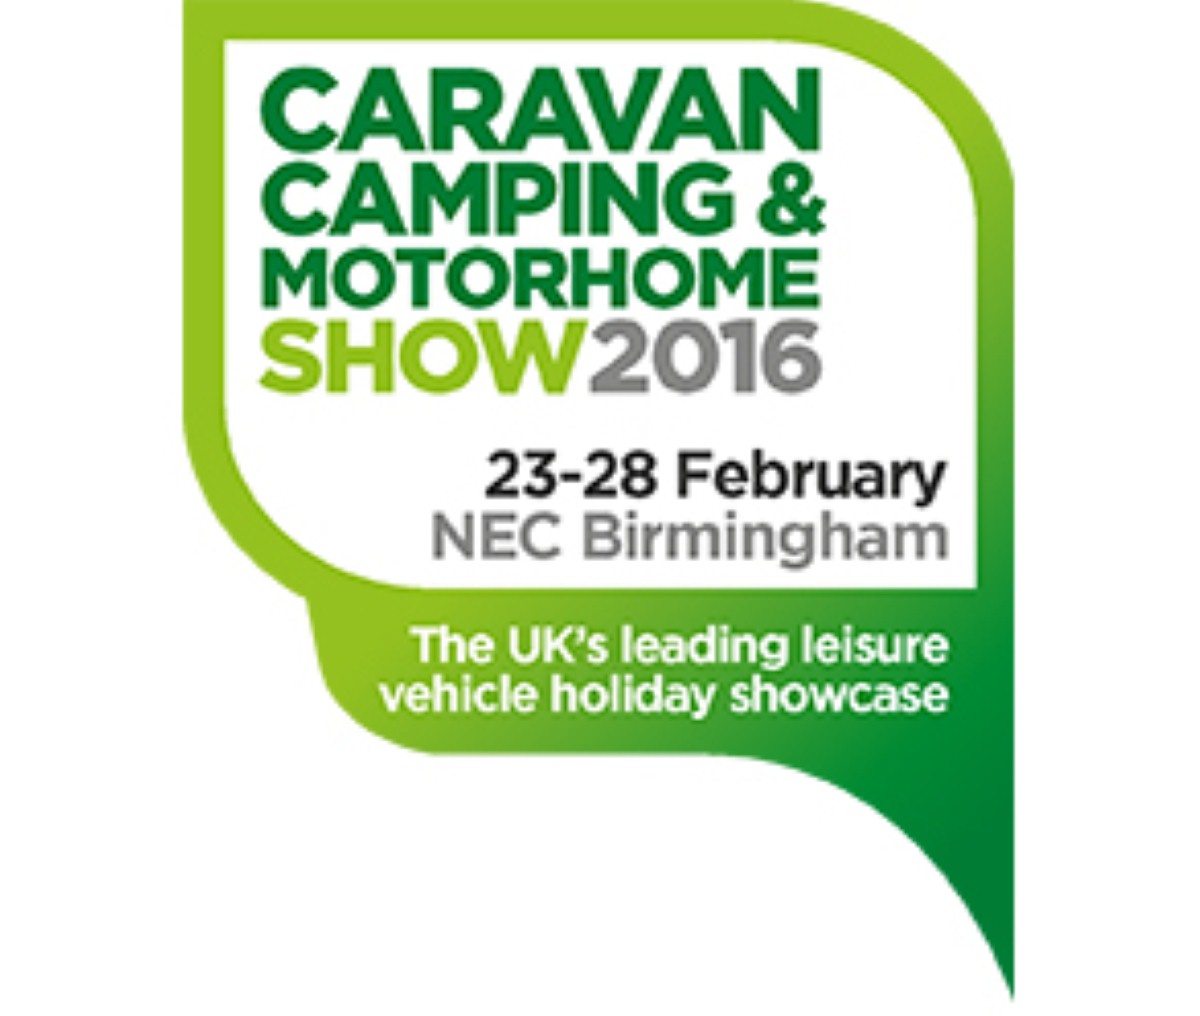 Read on to find out if you've won tickets to the Caravan, Camping & Motorhome Show 2016